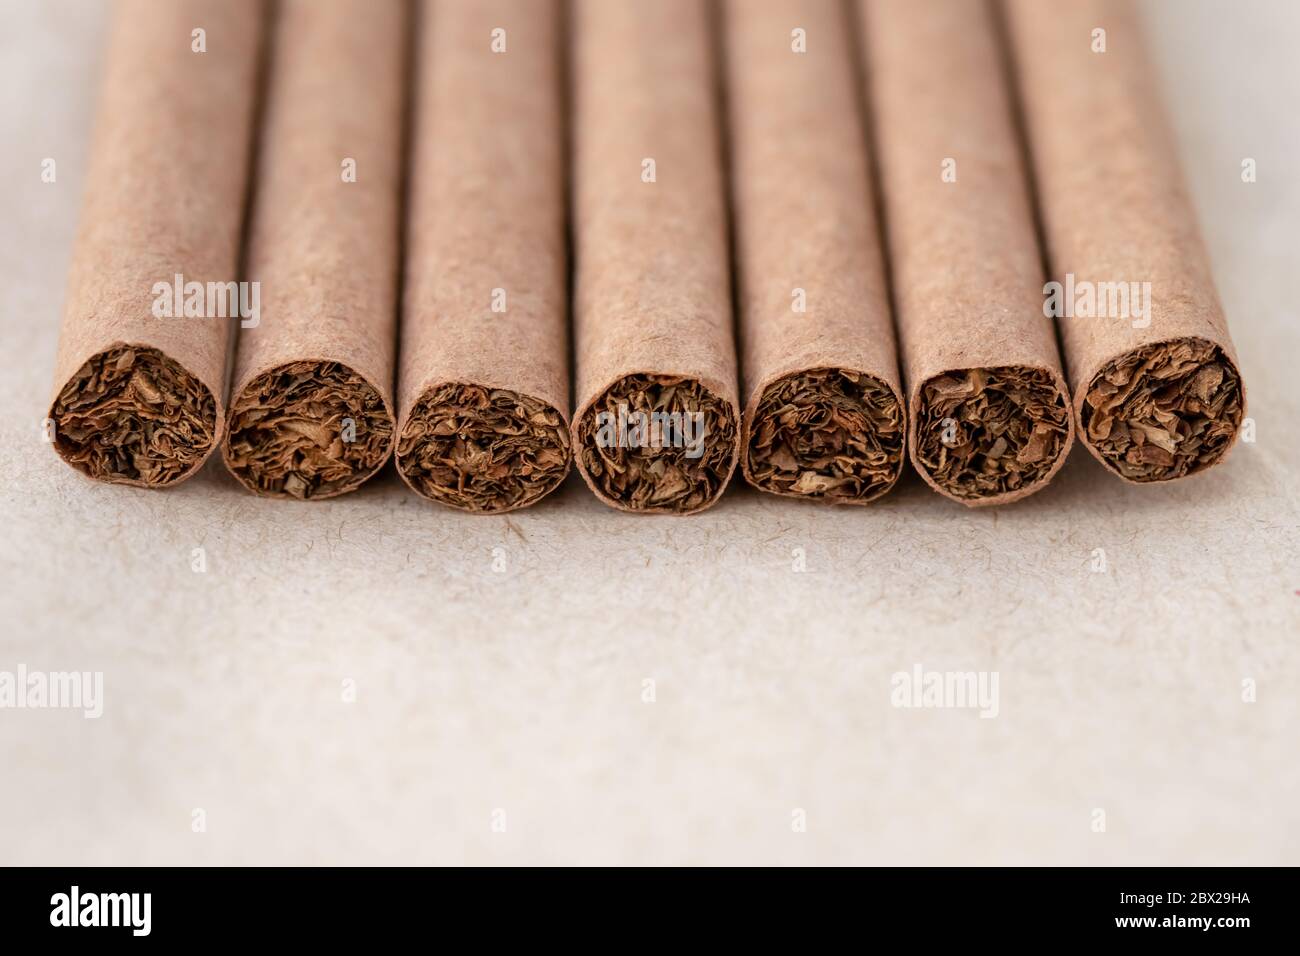 Close up of a dark cigars, brown cigarettes on neutral paper background. Bad habit concept Stock Photo